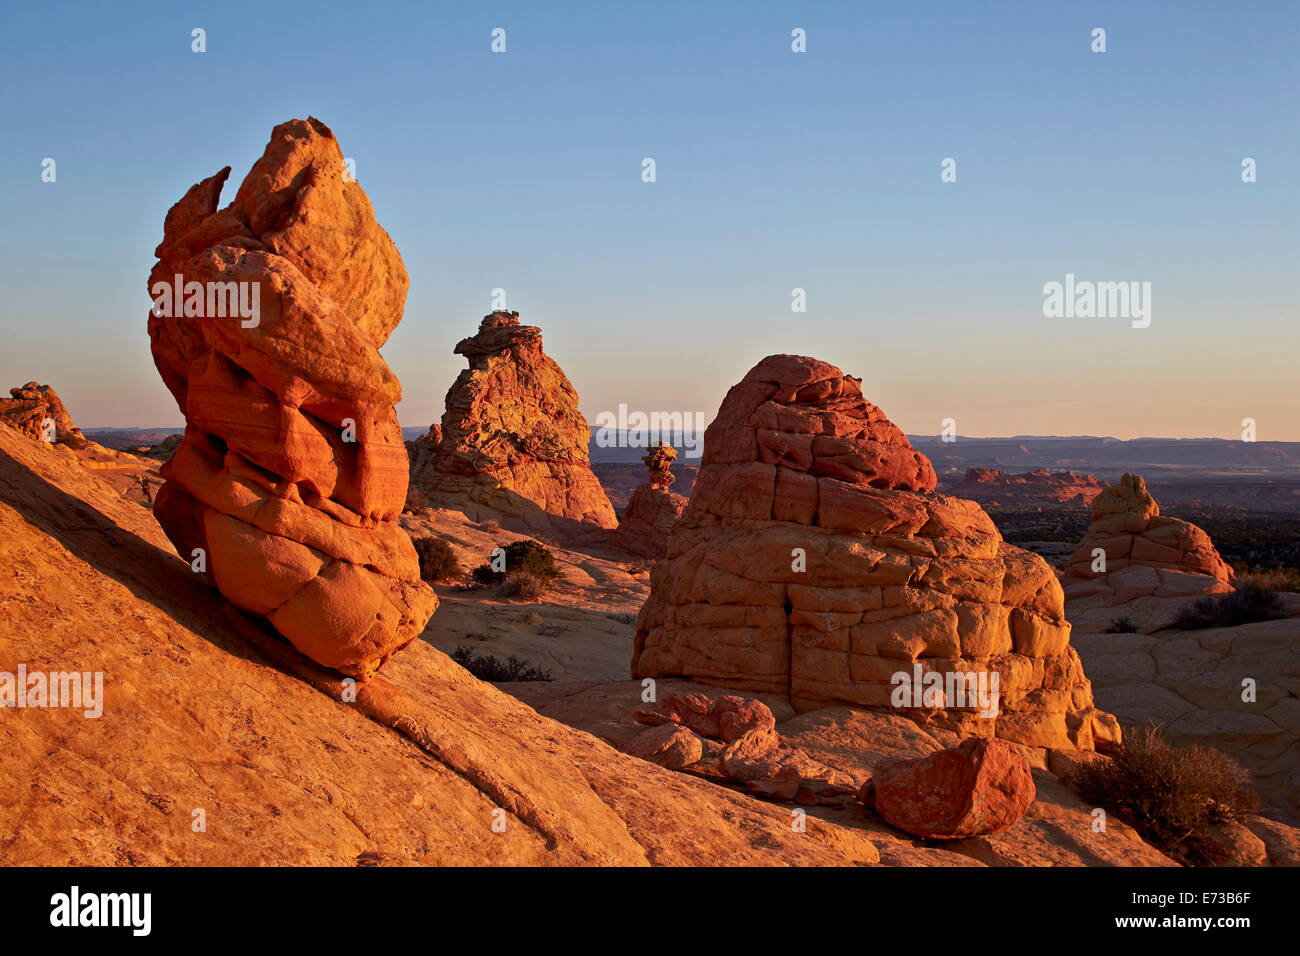 Sandstone formatios at first light, Coyote Buttes Wilderness, Vermilion Cliffs National Monument, Arizona, USA Stock Photo